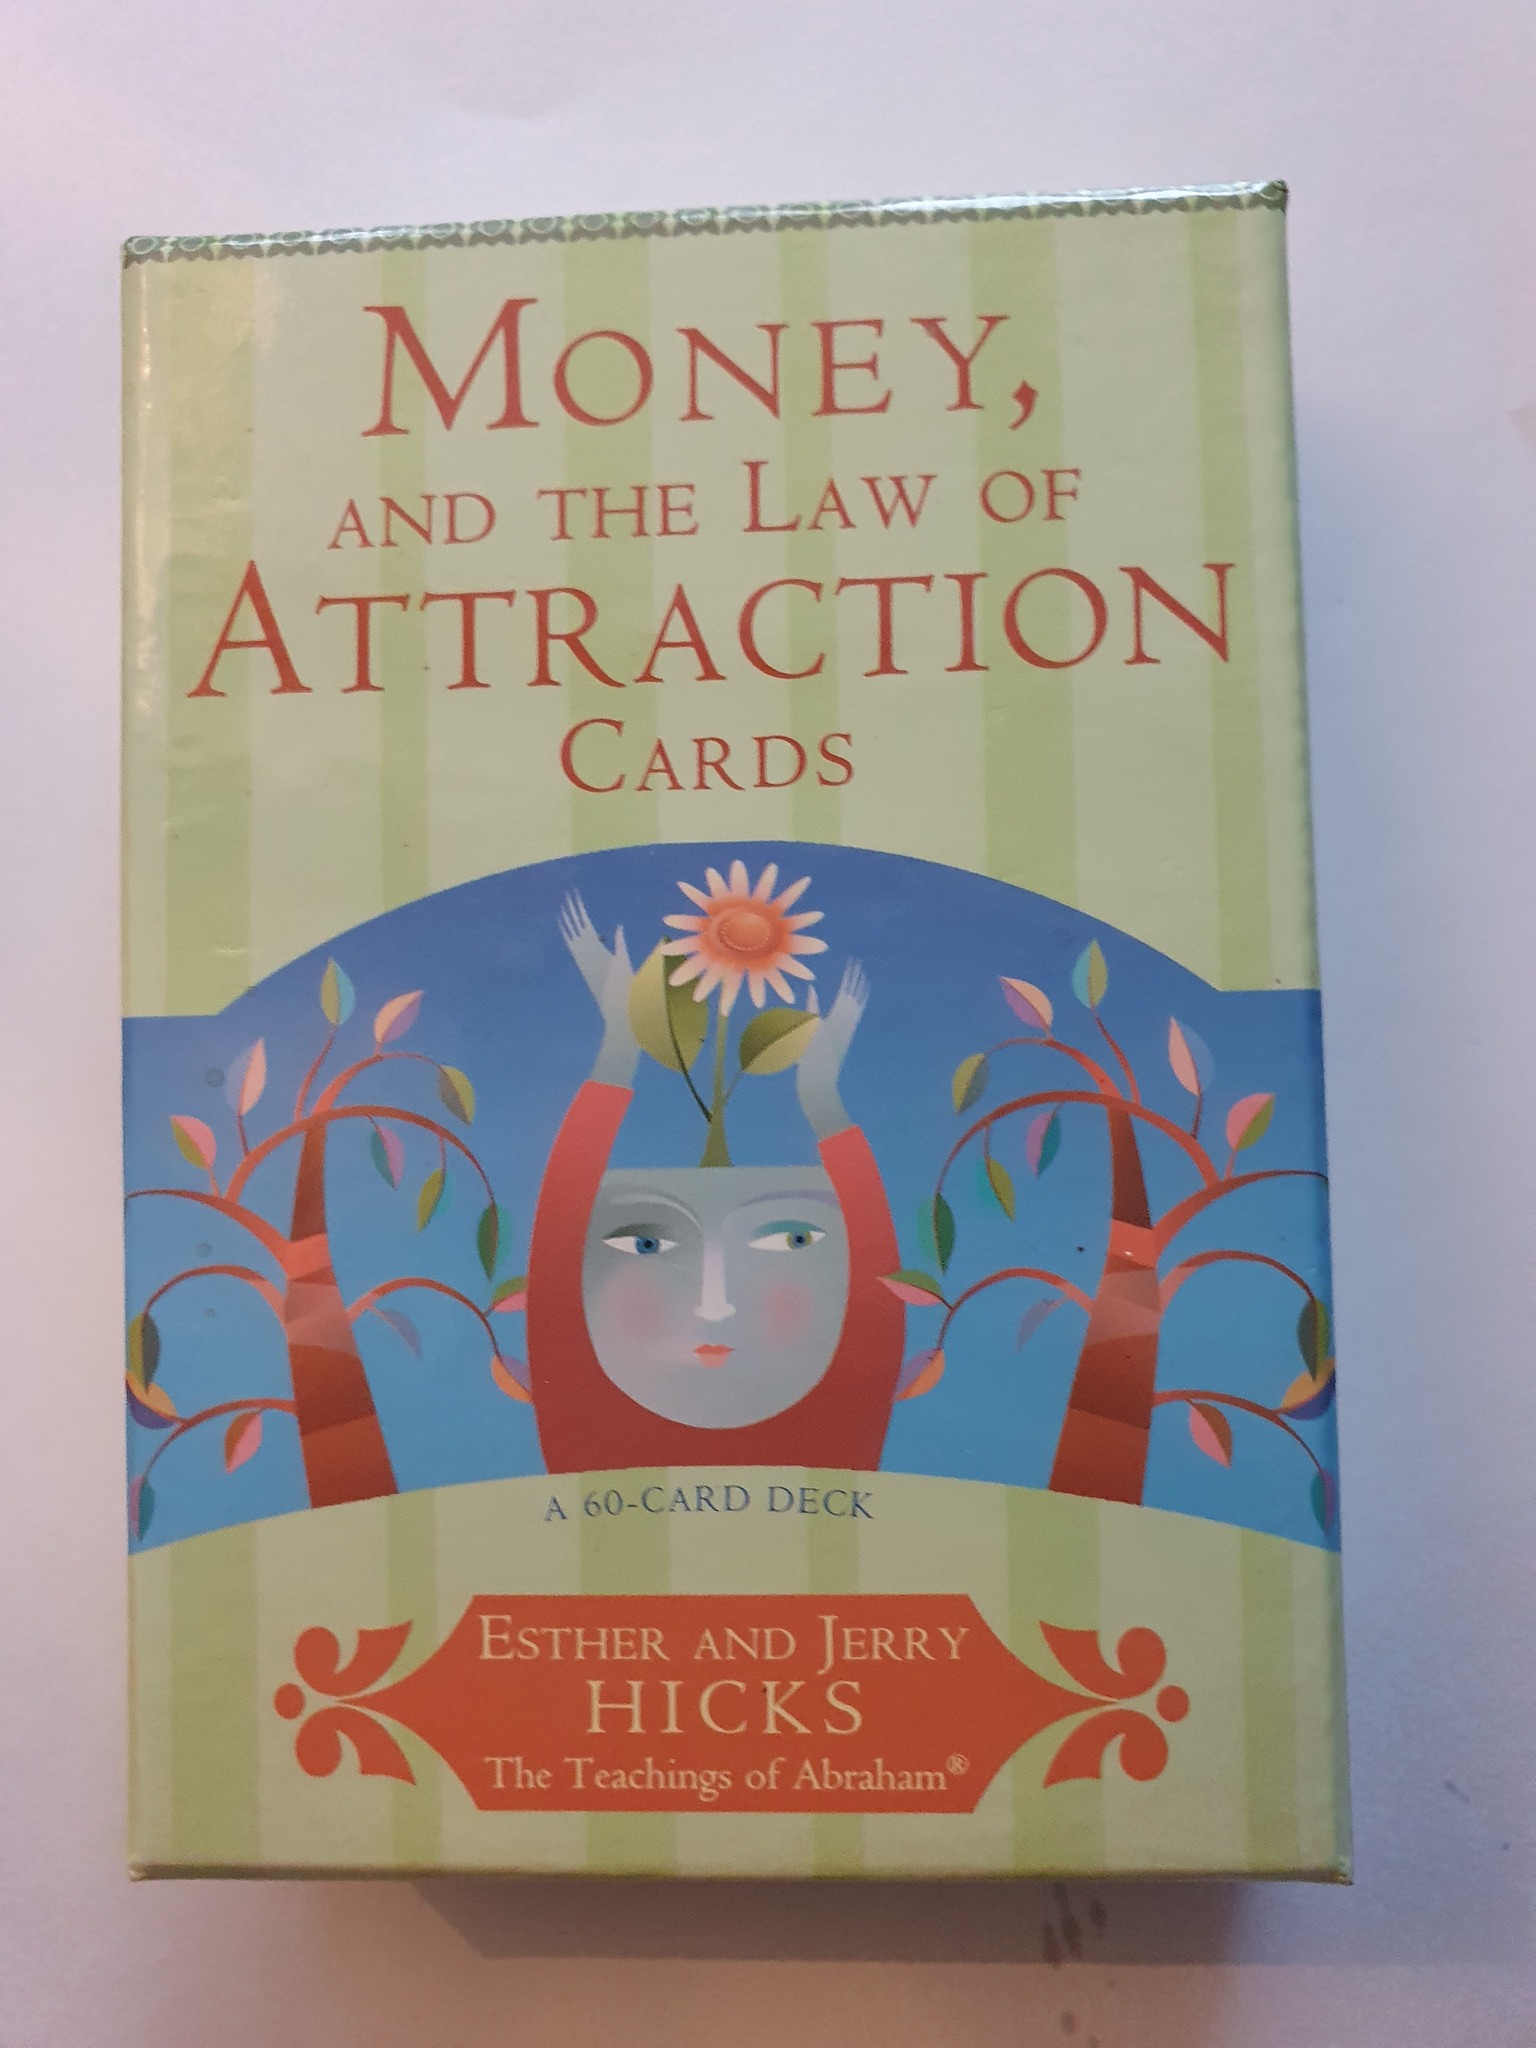 Money and the law of attraction cards